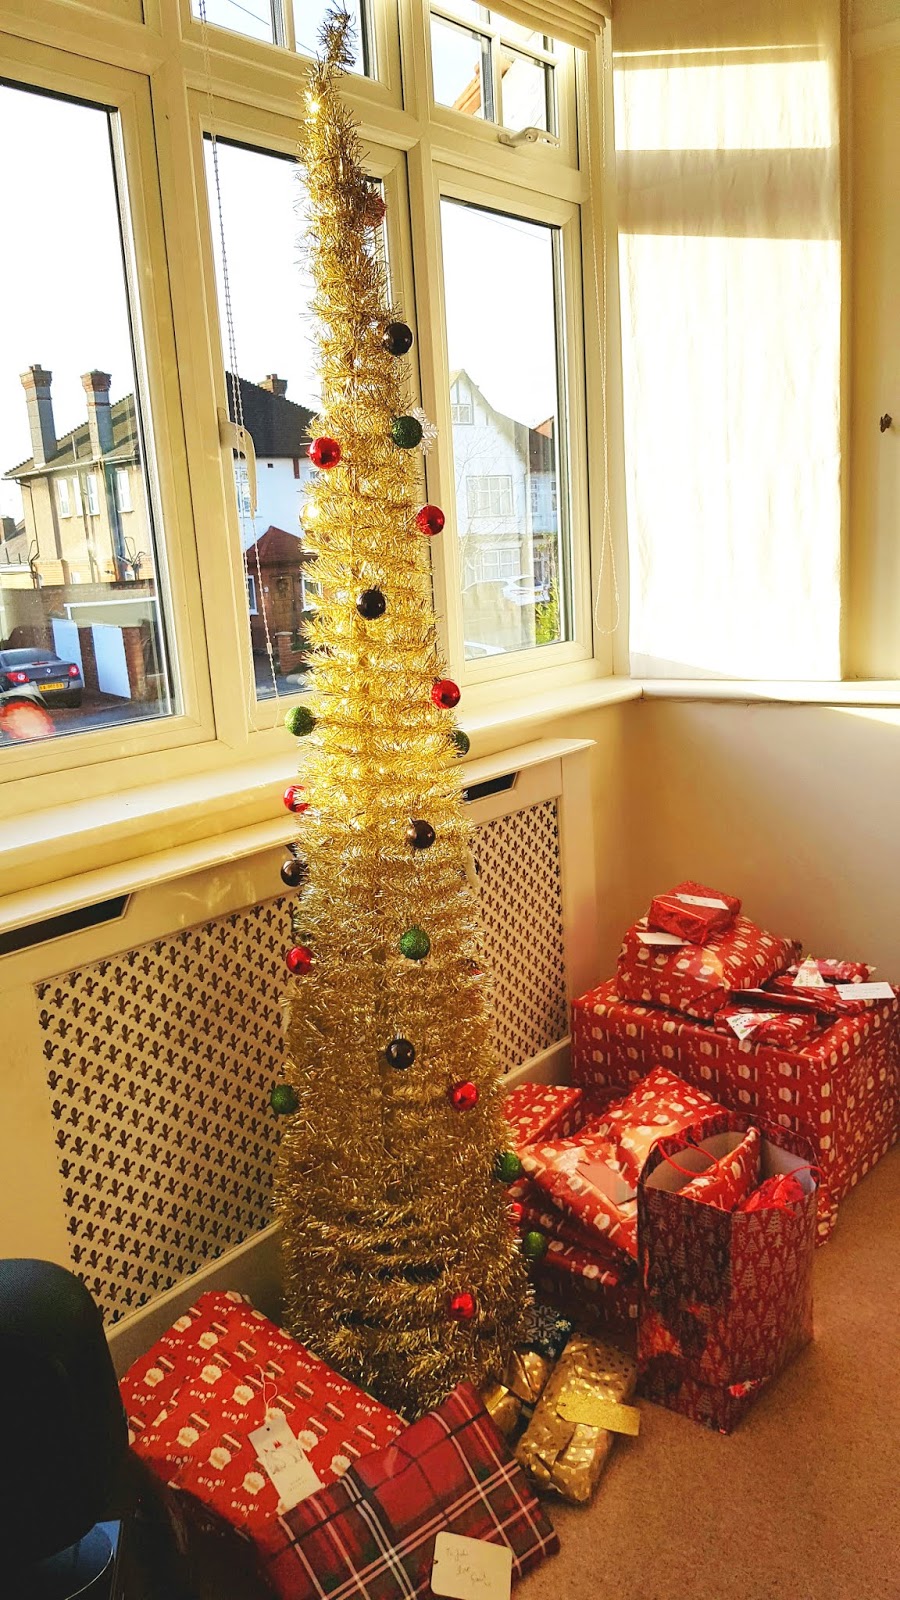 The easiest way to have an artificial Christmas tree. Gold pop up tree from B and Q